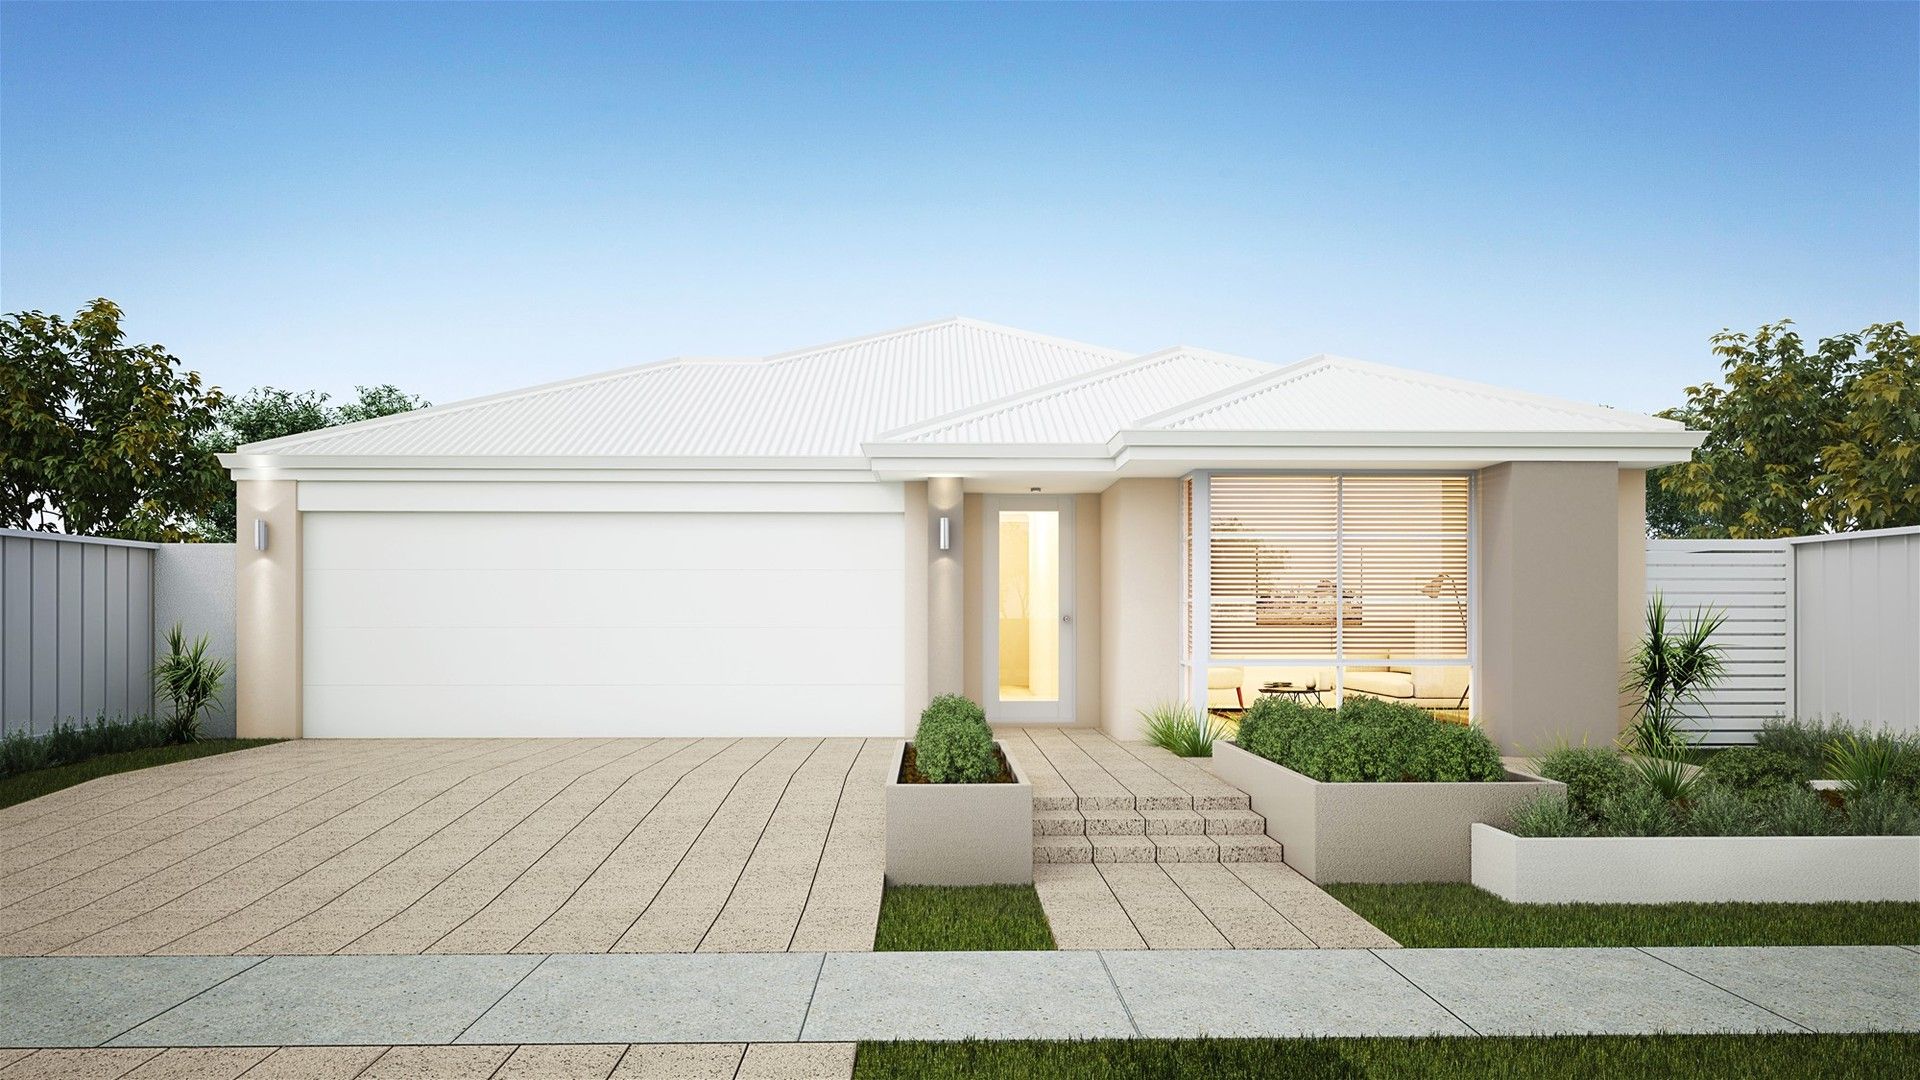 4 bedrooms New House & Land in 706 Kirk Close COOGEE WA, 6166